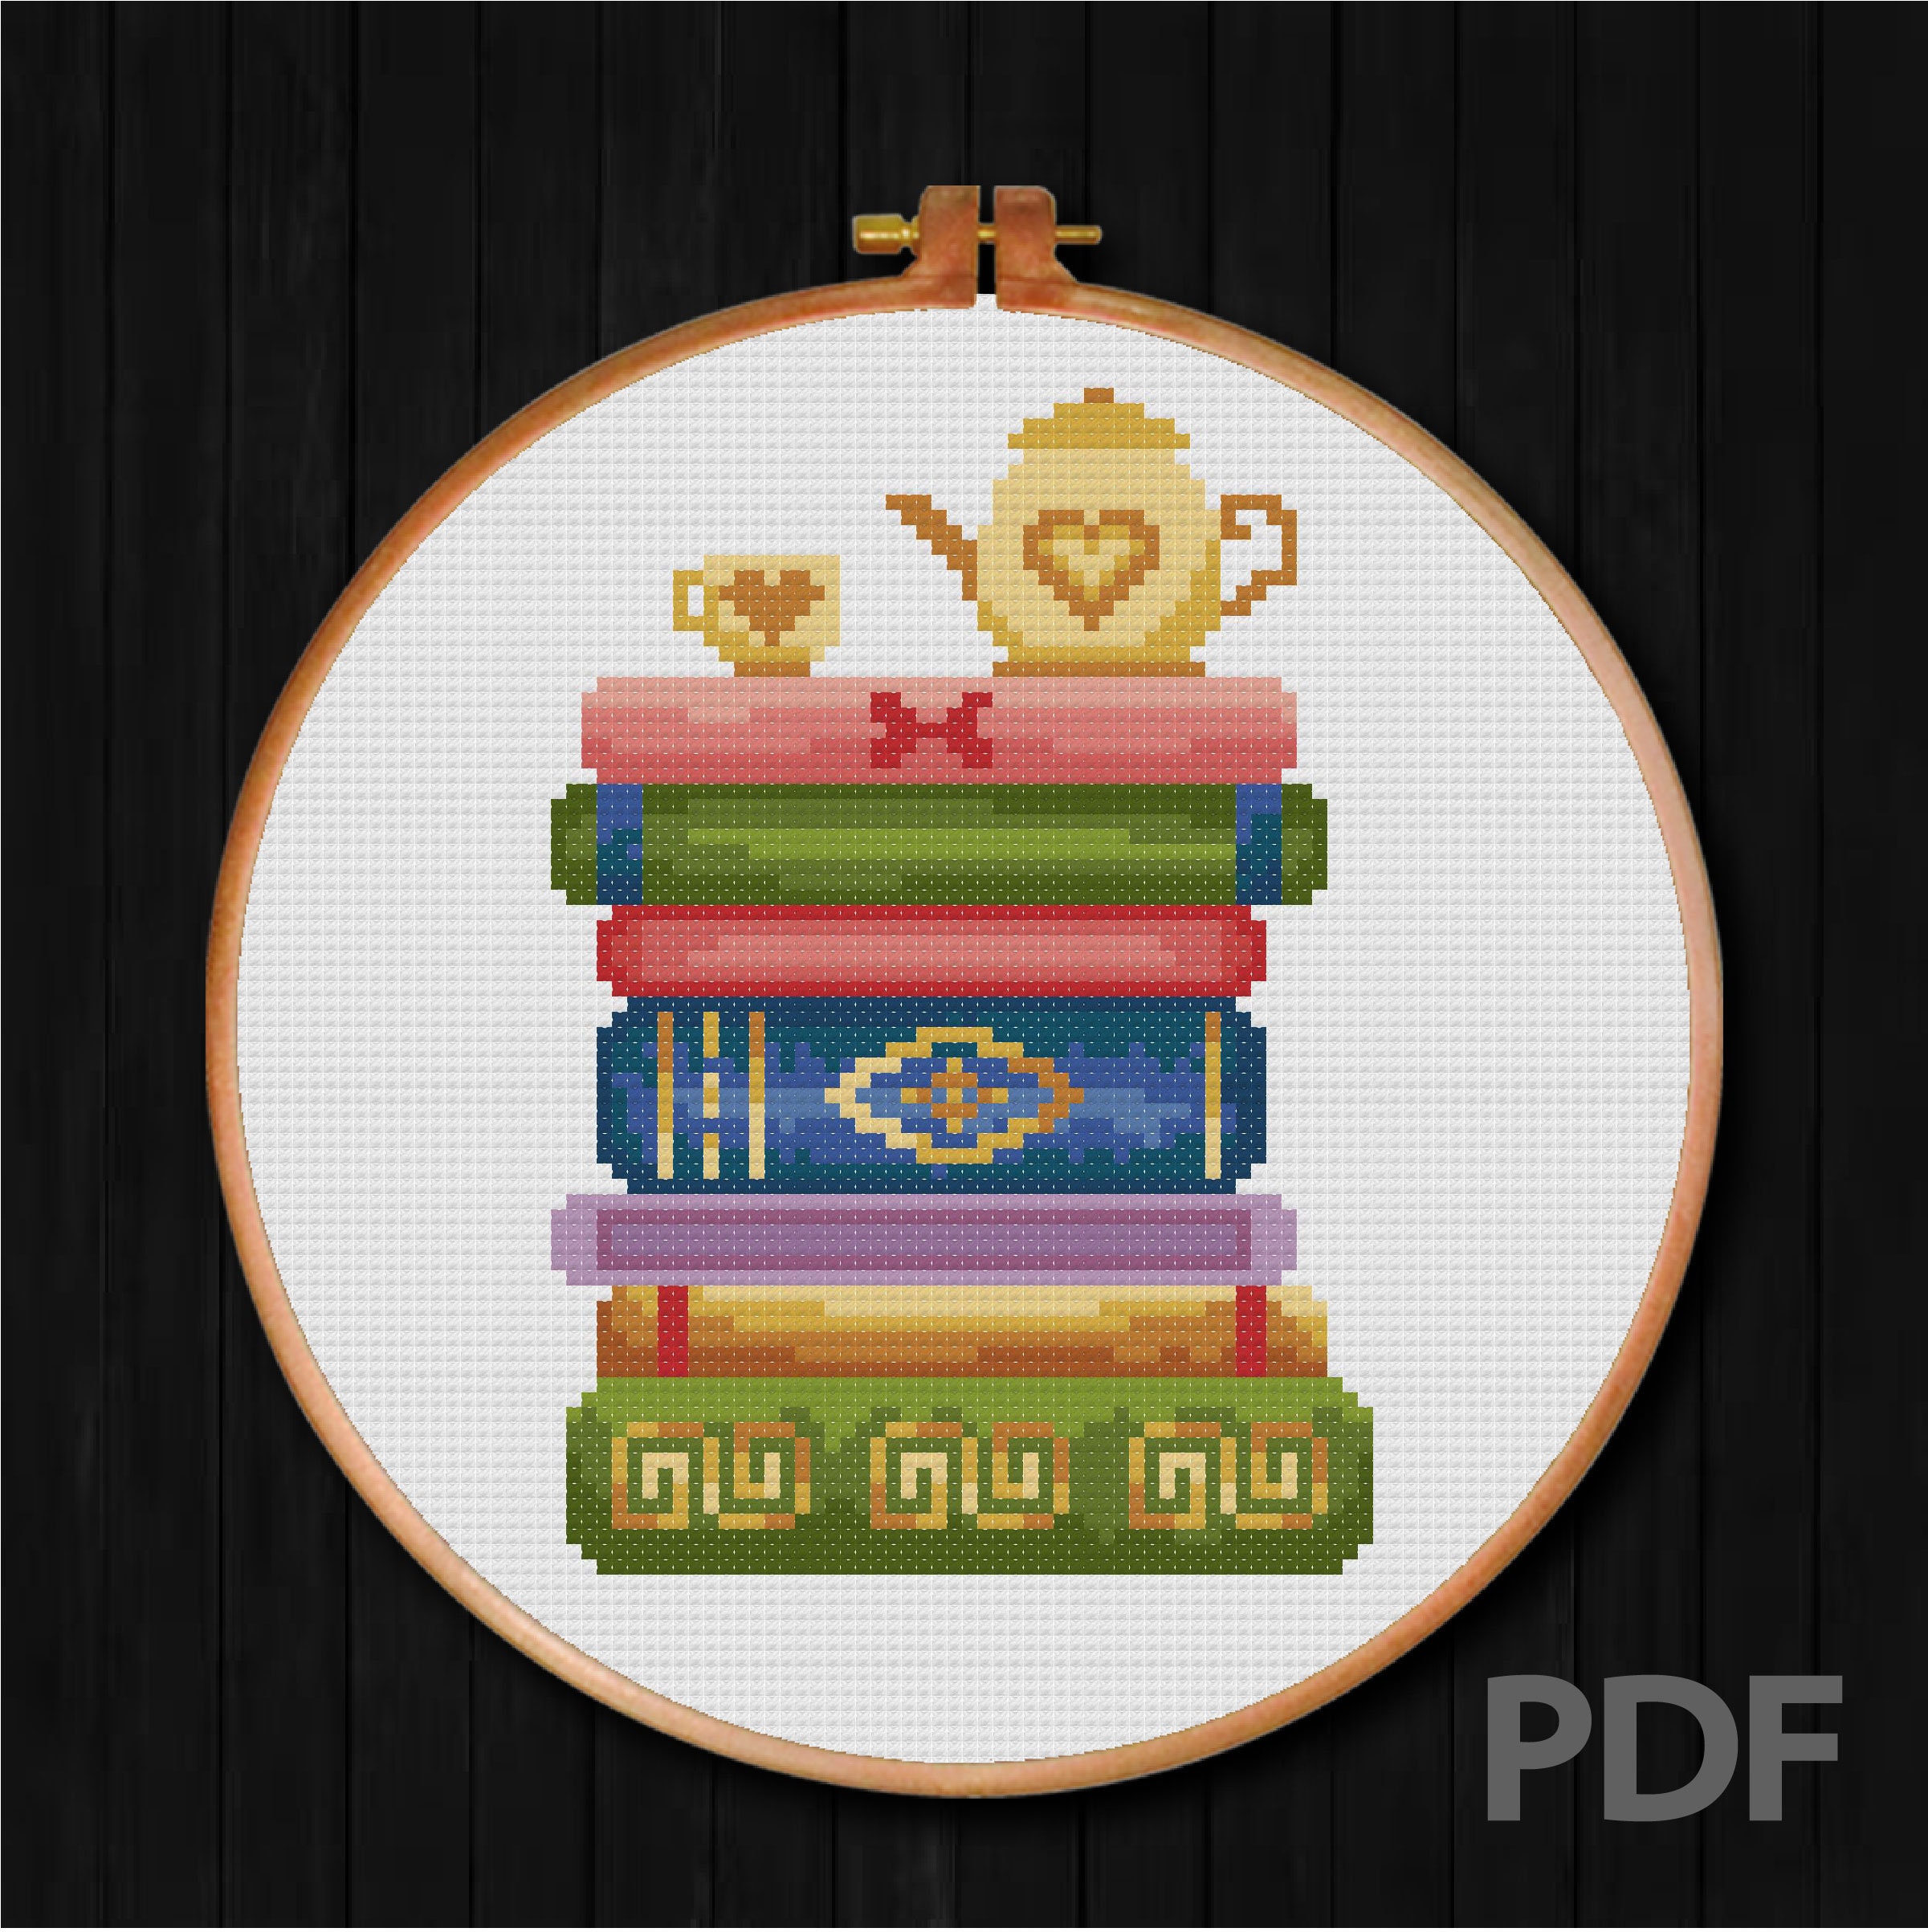 Stack of Books Embroidery Pattern Reading Embroidery Sampler Pattern Hand  Embroidery Pattern Instant Download PDF 